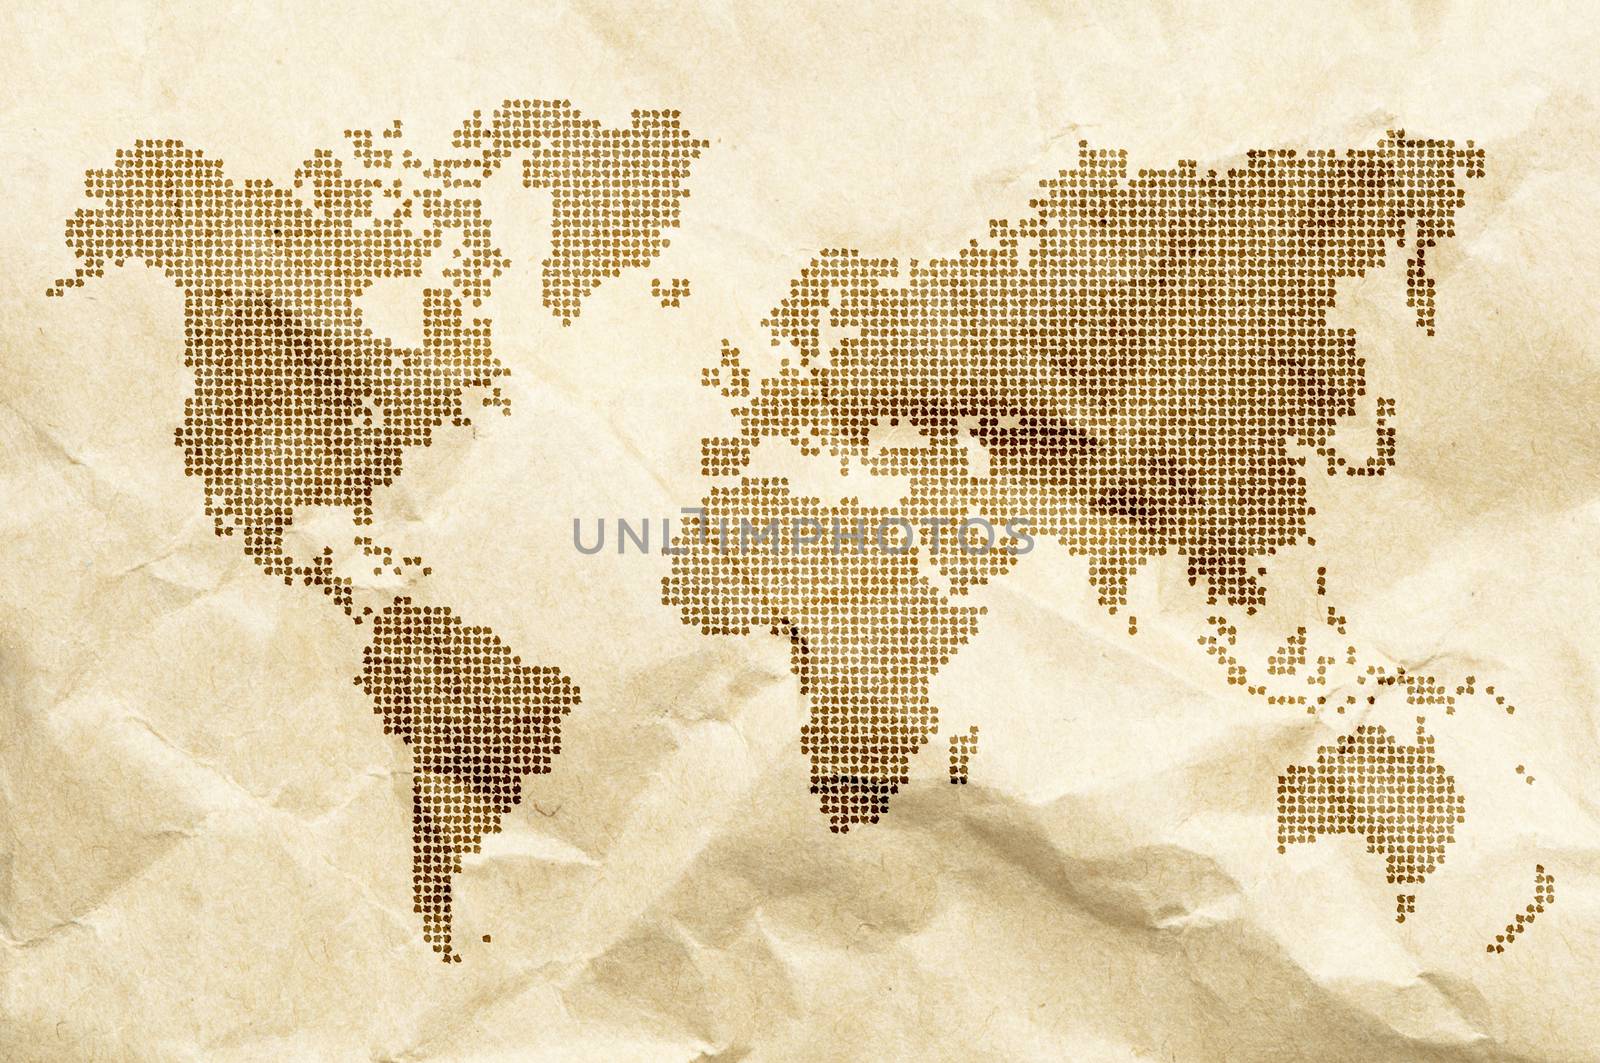 Dot World old style map background. Crumpled old paper